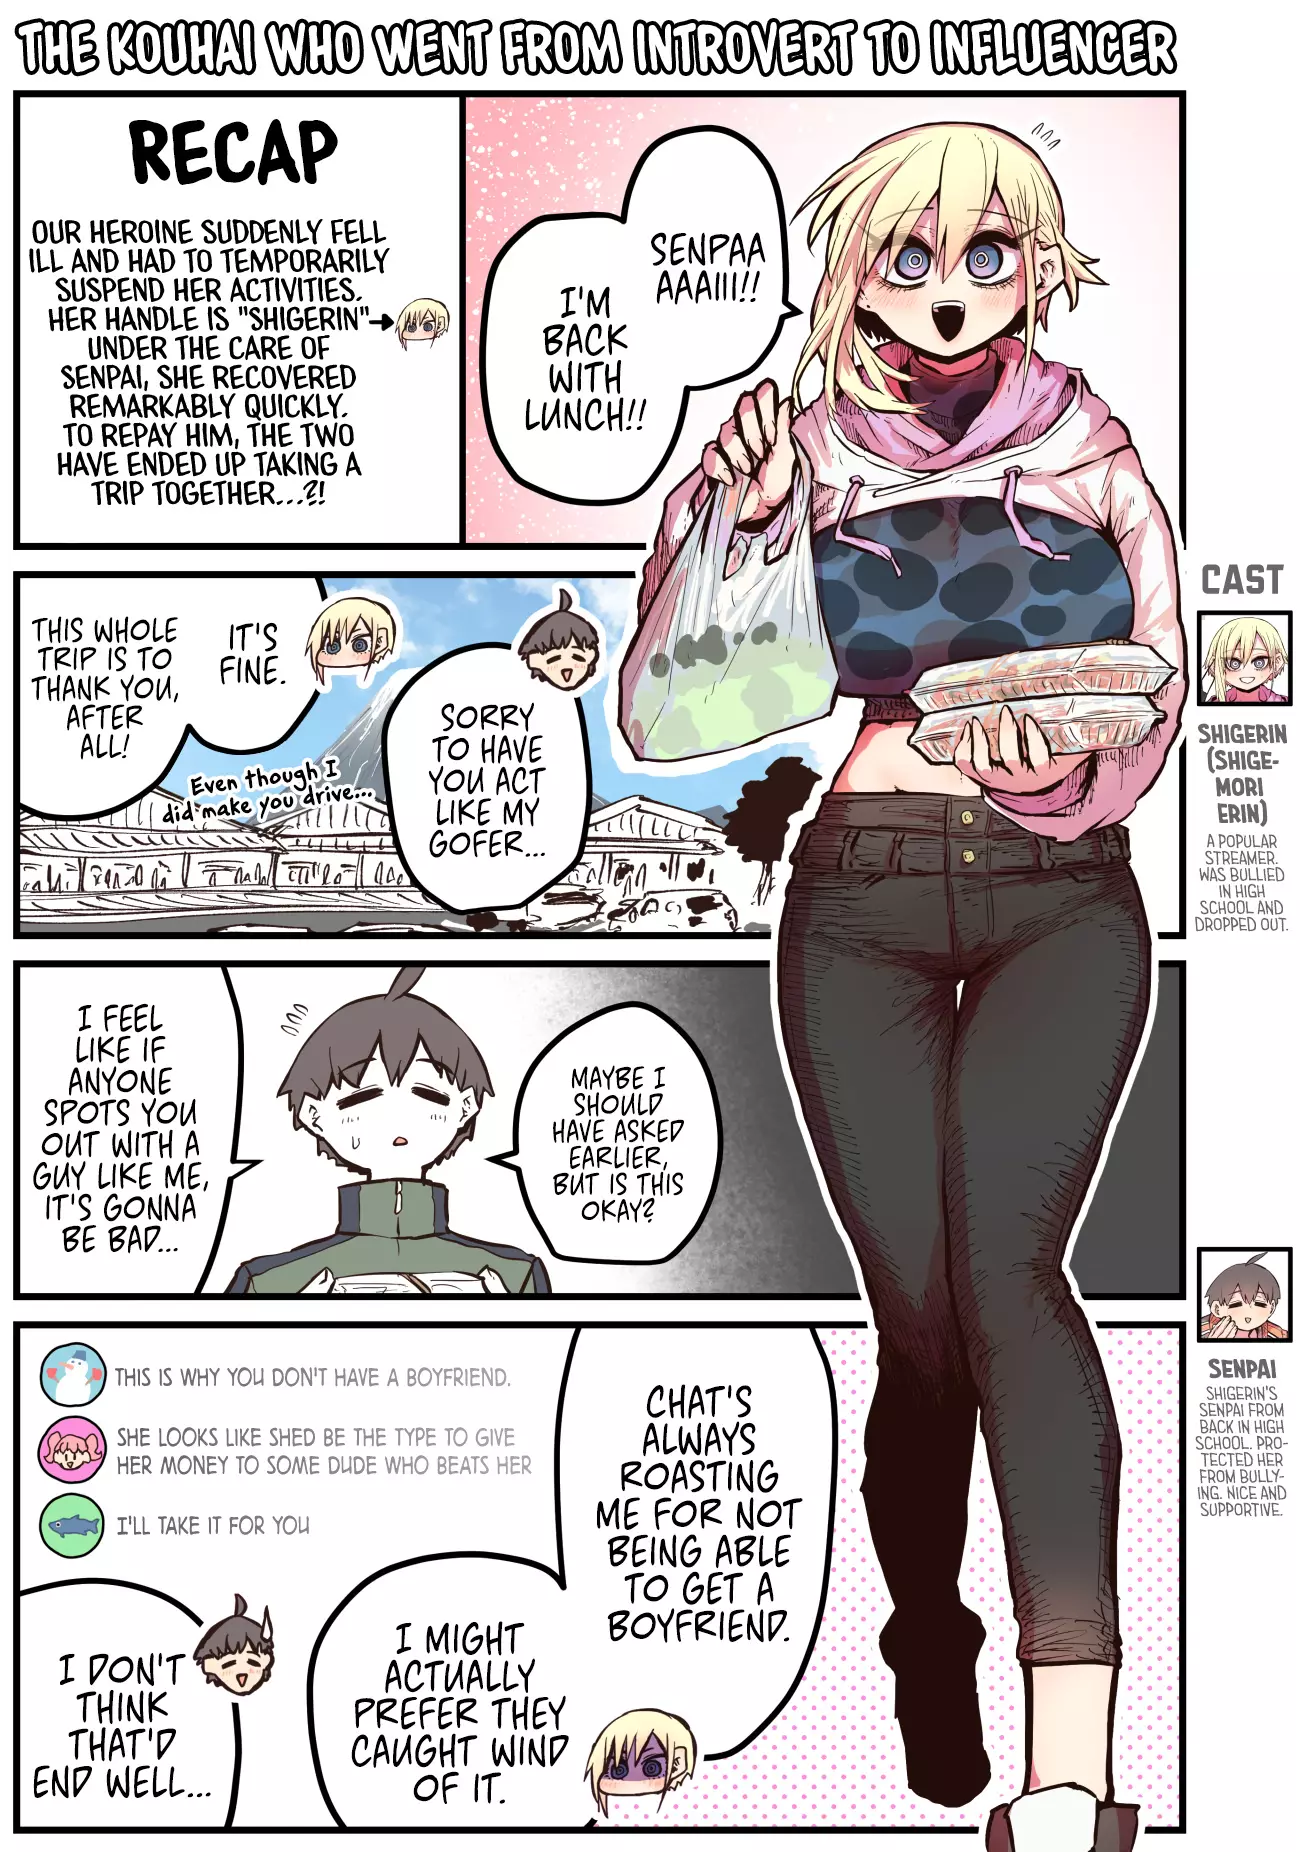 The Kouhai Who Went From Introvert To Influencer - 8 page 1-913d29ea